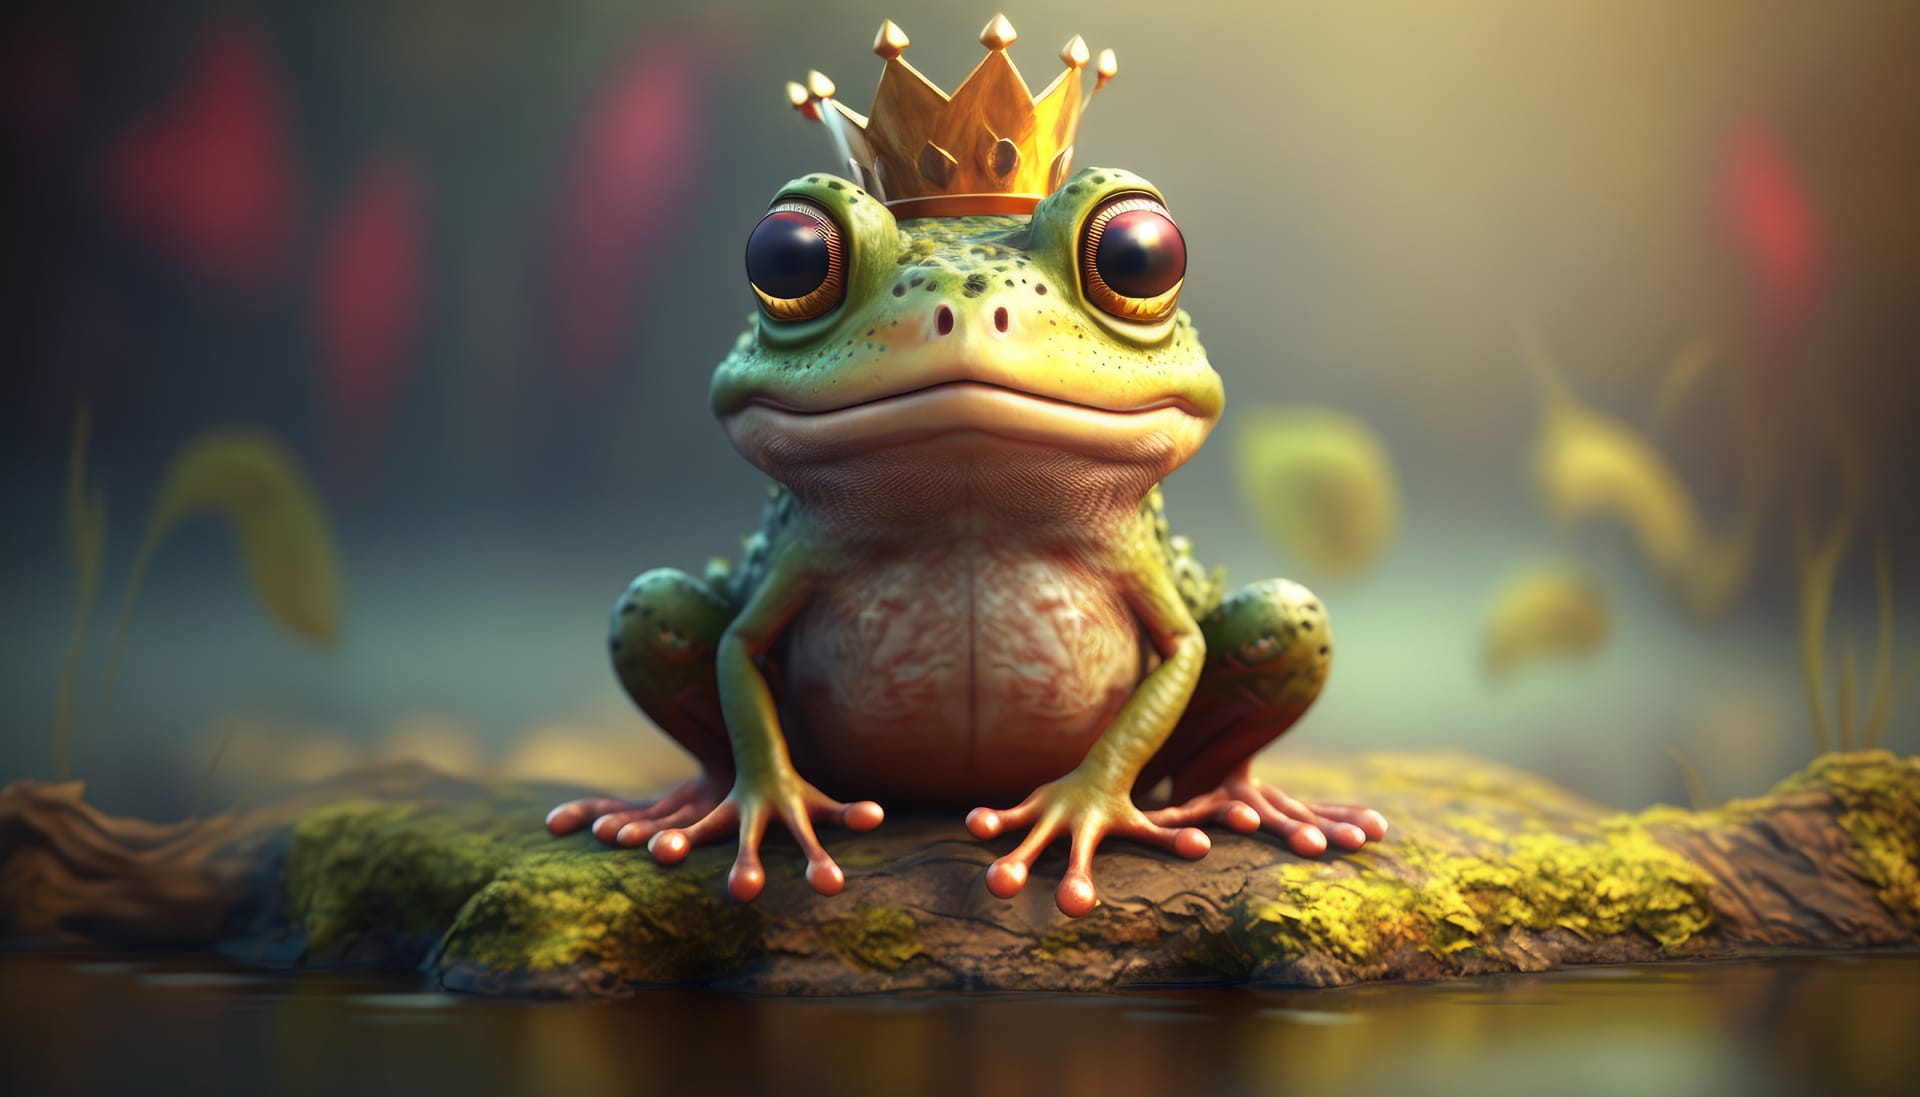 Frog with crown his head sits rock